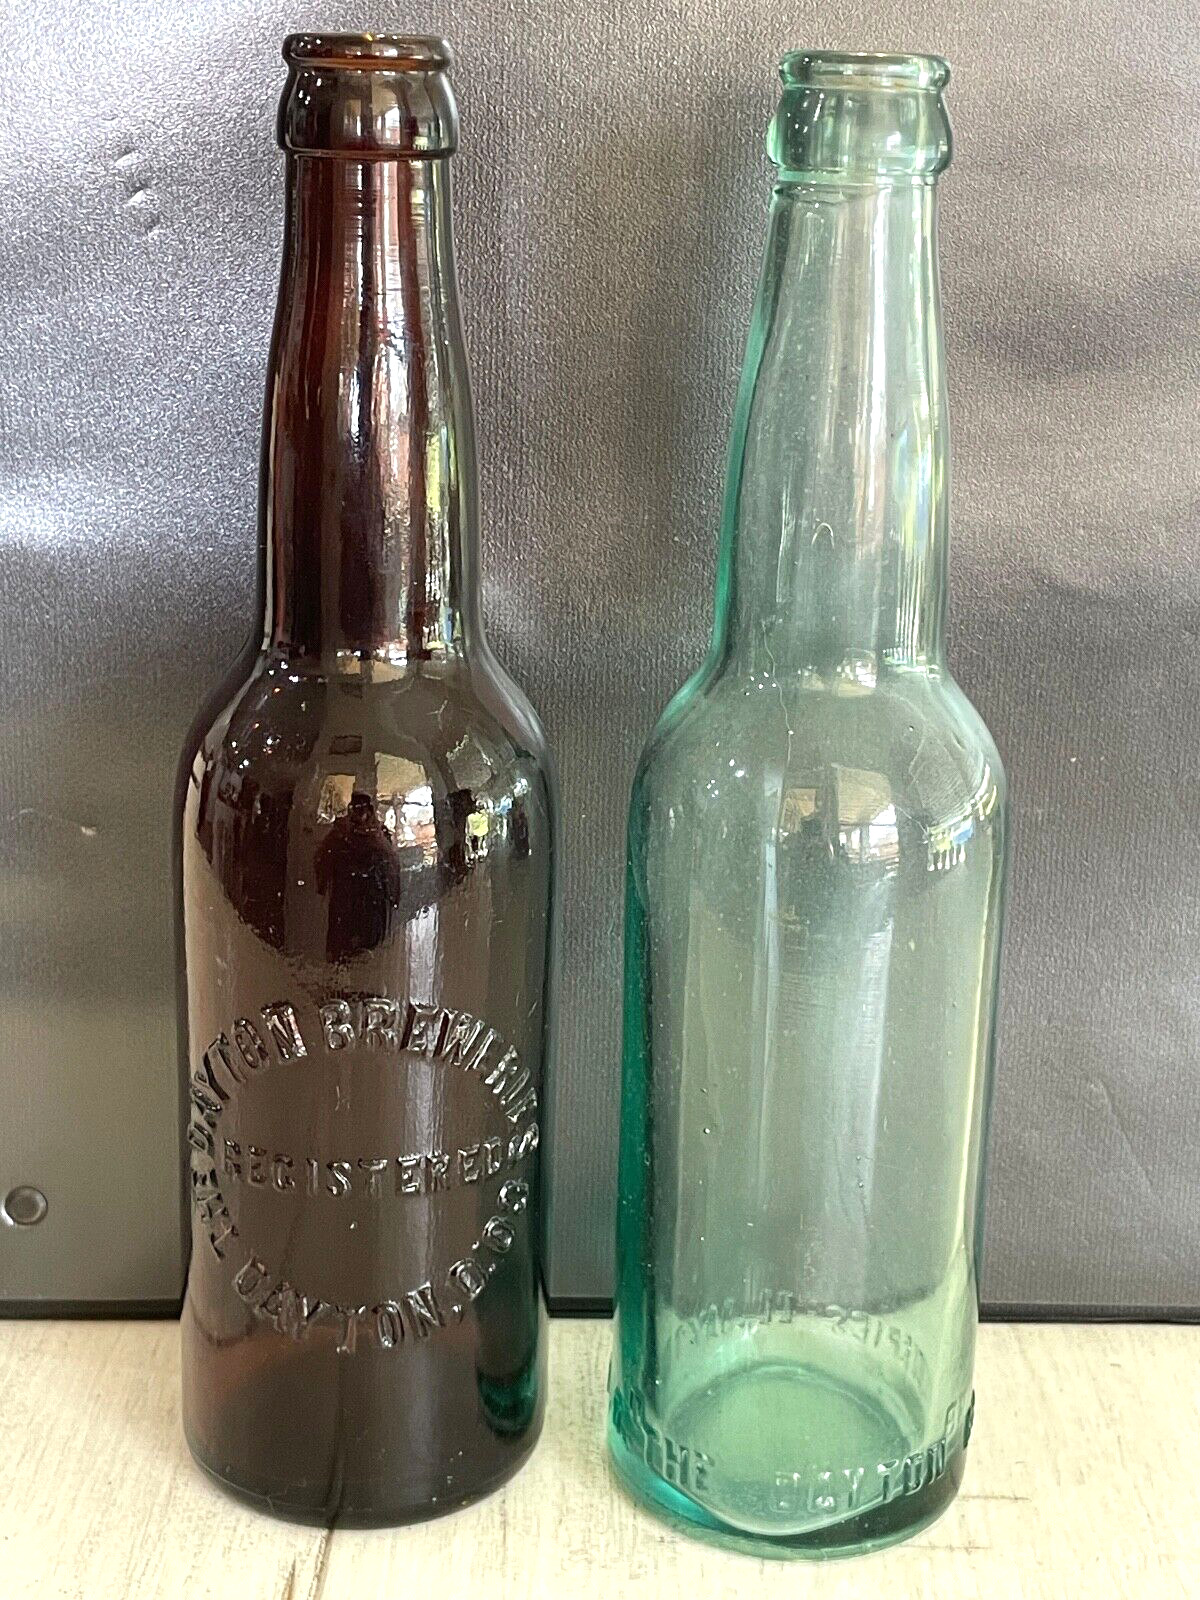 THE DAYTON BREWERIES BEER BOTTLE 12 OUNCE - 1 EACH CLEAR & AMBER